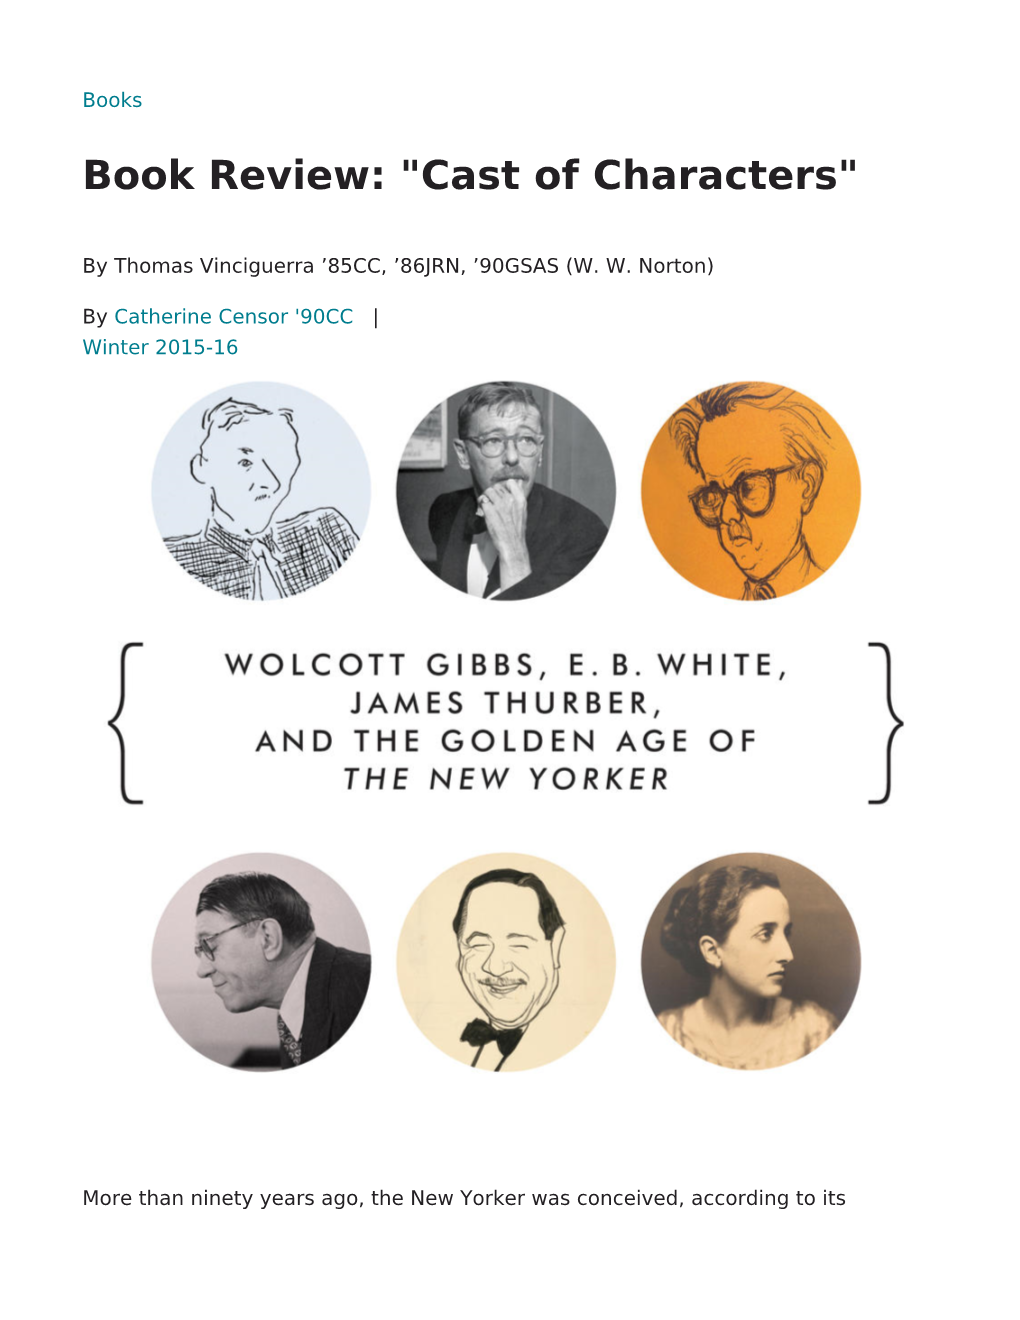 View: "Cast of Characters"